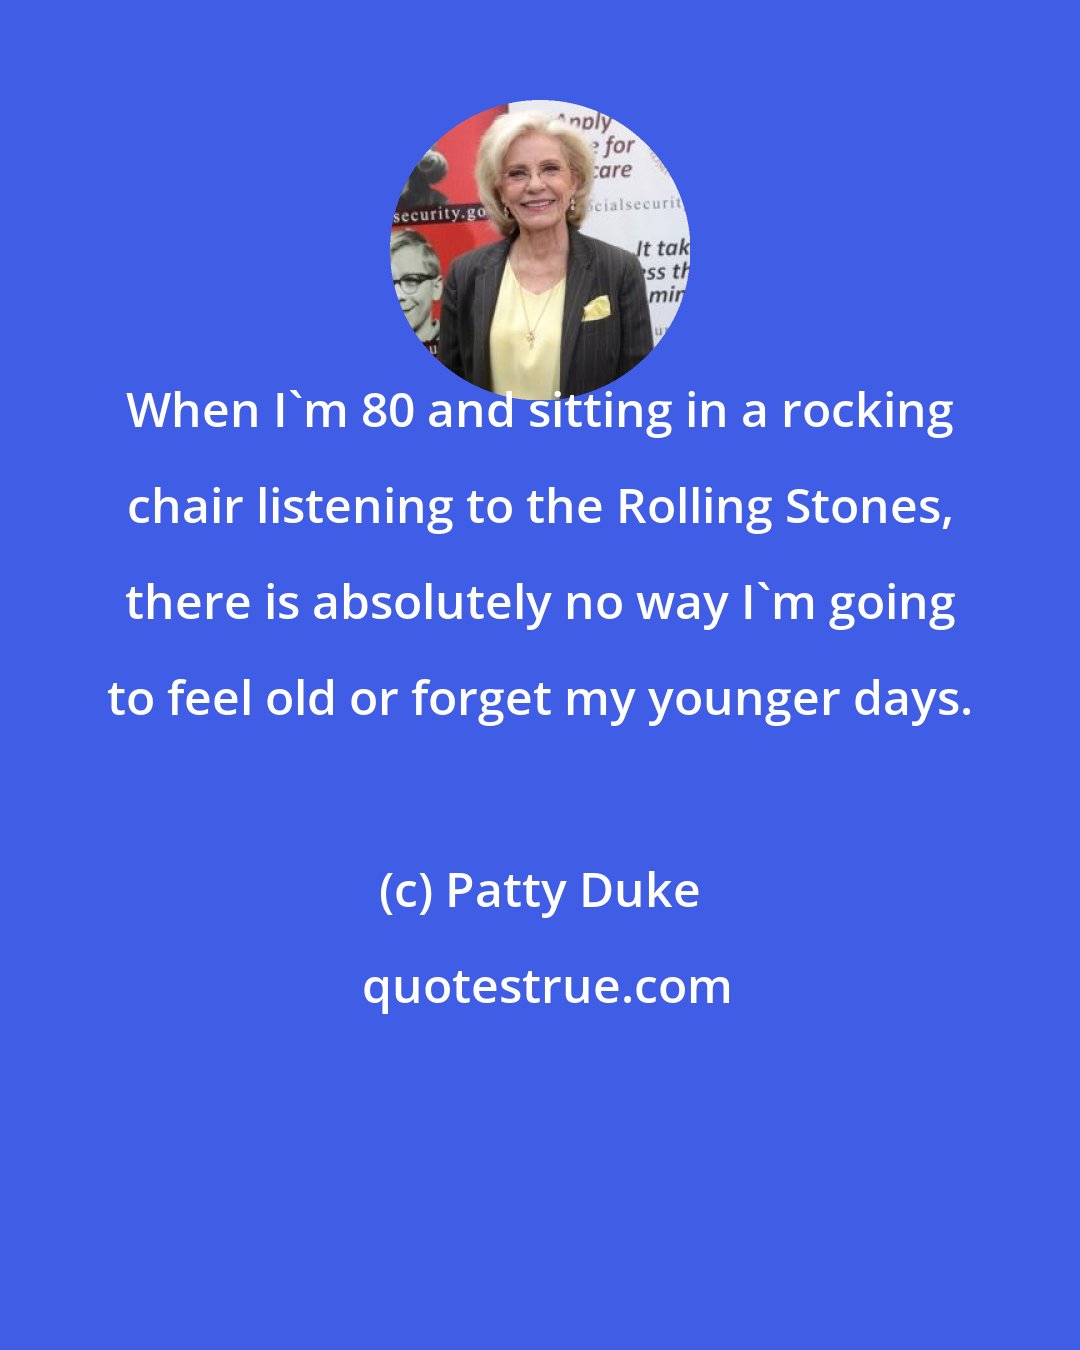 Patty Duke: When I'm 80 and sitting in a rocking chair listening to the Rolling Stones, there is absolutely no way I'm going to feel old or forget my younger days.